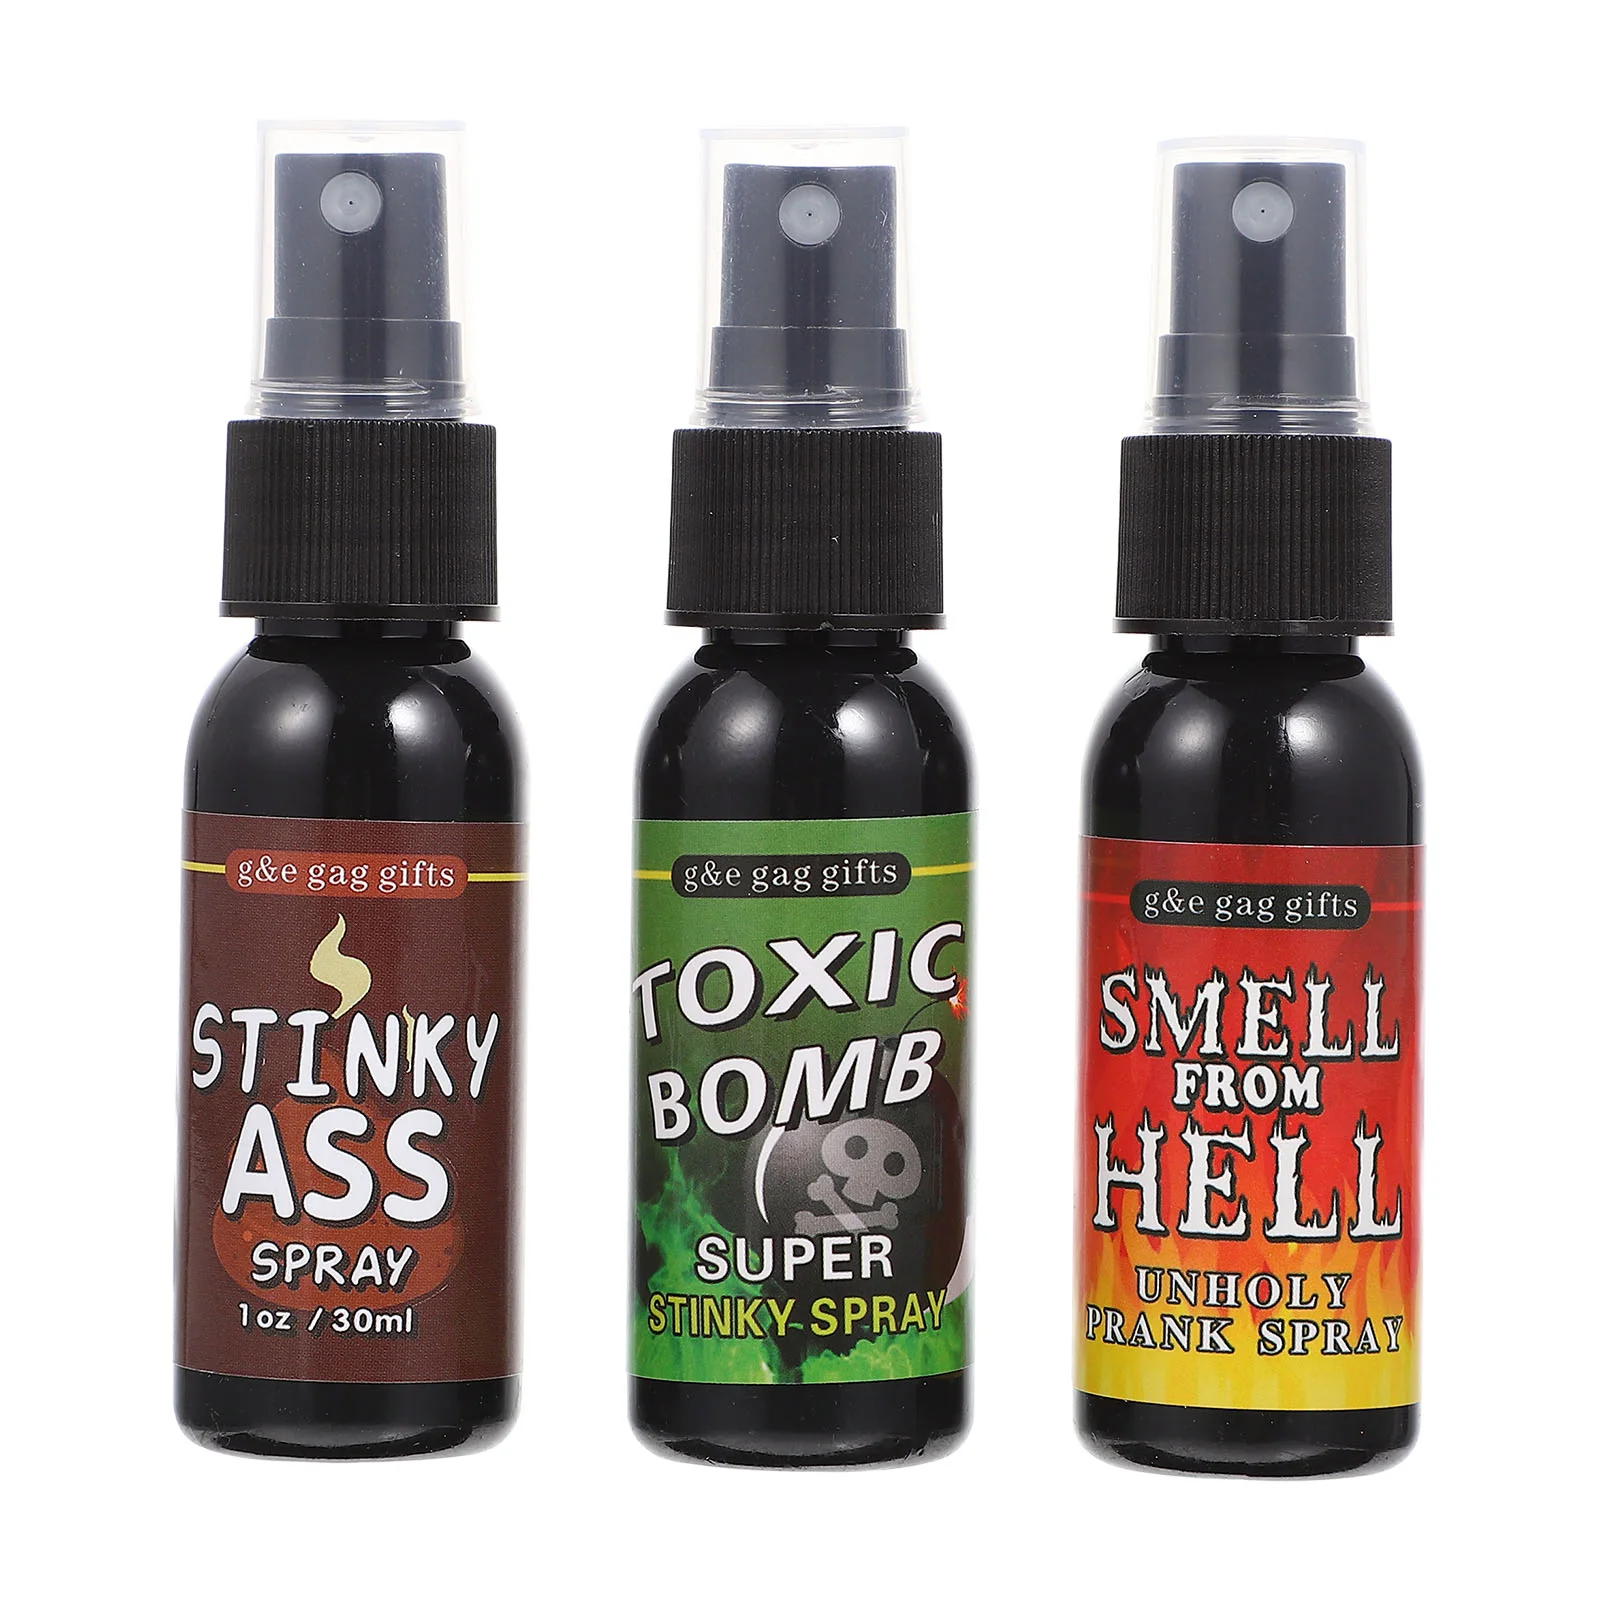 

Spray Fart Prank Halloween Party Smell Smelly Prop Bomb Toy Stinky Extra Funny Stink Liquid Trick Supplies Gag Ass Wet Farting